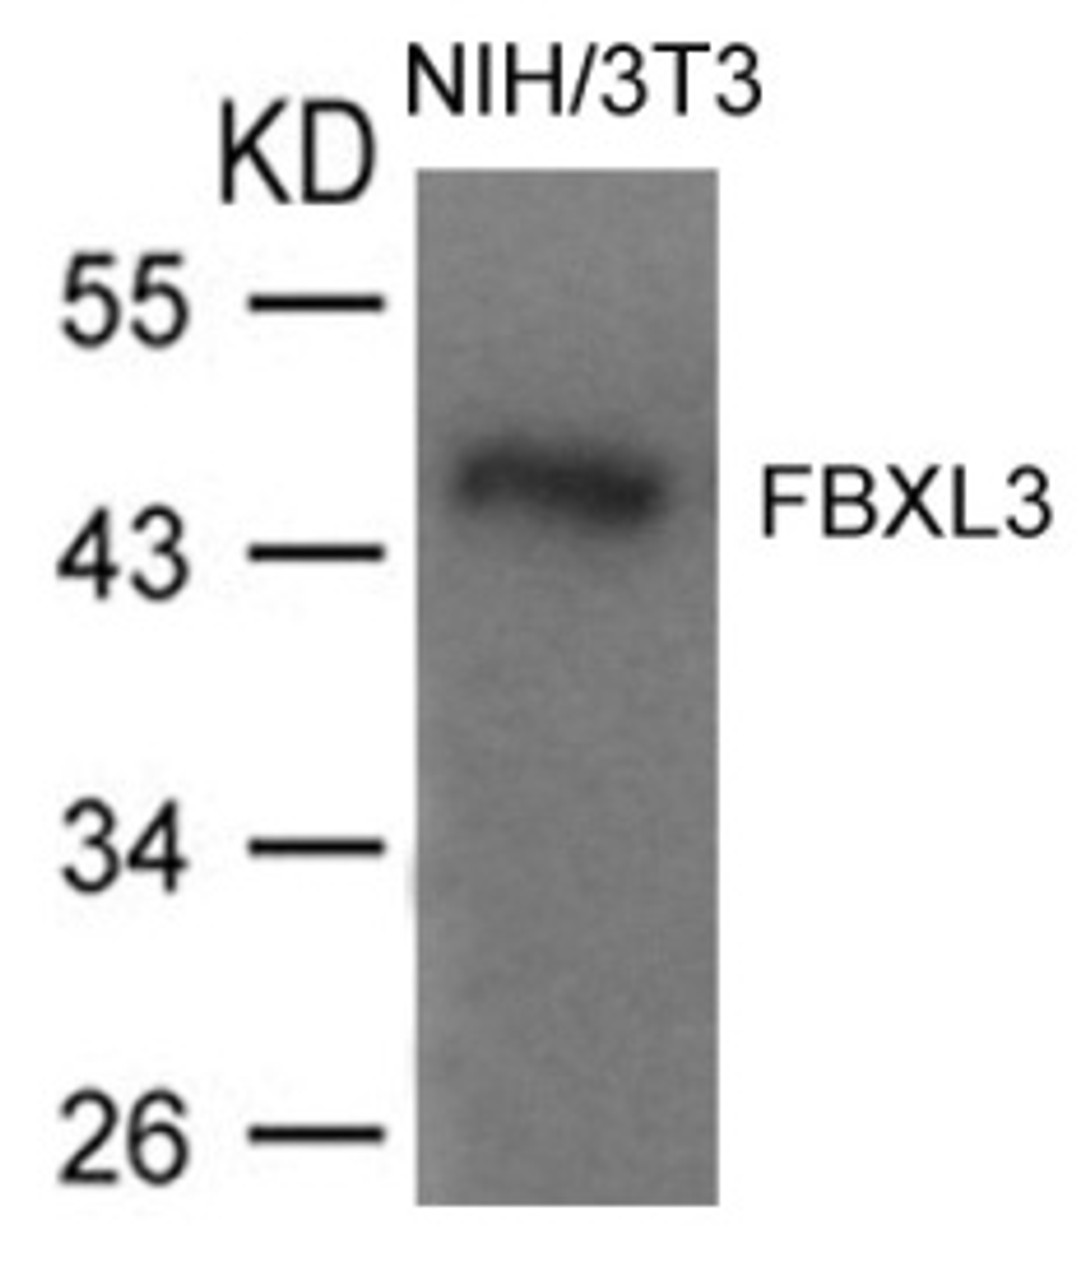 Western blot analysis of lysed extracts from NIH/3T3 cells using FBXL3 Antibody.